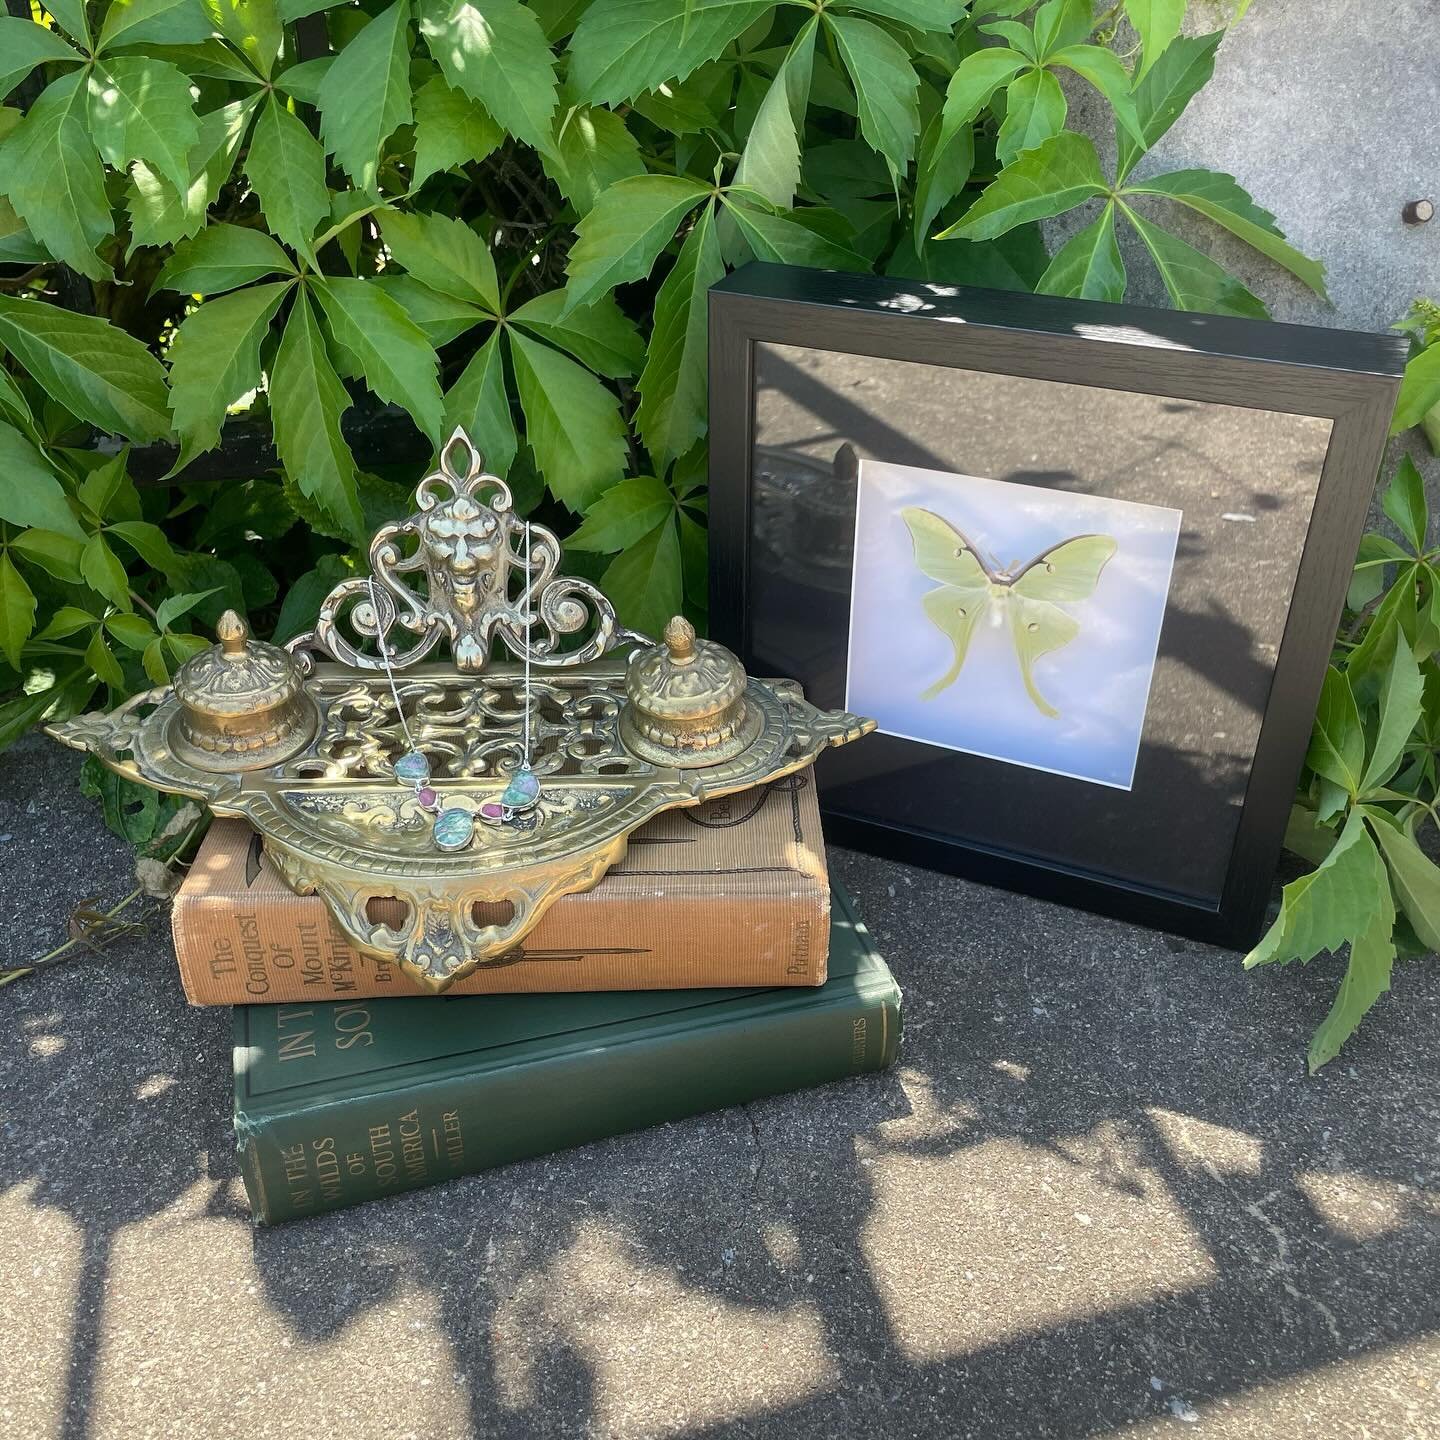 Dreamy goodness right here. Luna moth $65. Sterling gemstone necklace $115. The Conquest of Mount McKinley $150, In the Wilds of South America $20. Antique Renaissance Revival Double Brass lion Inkwell $80.